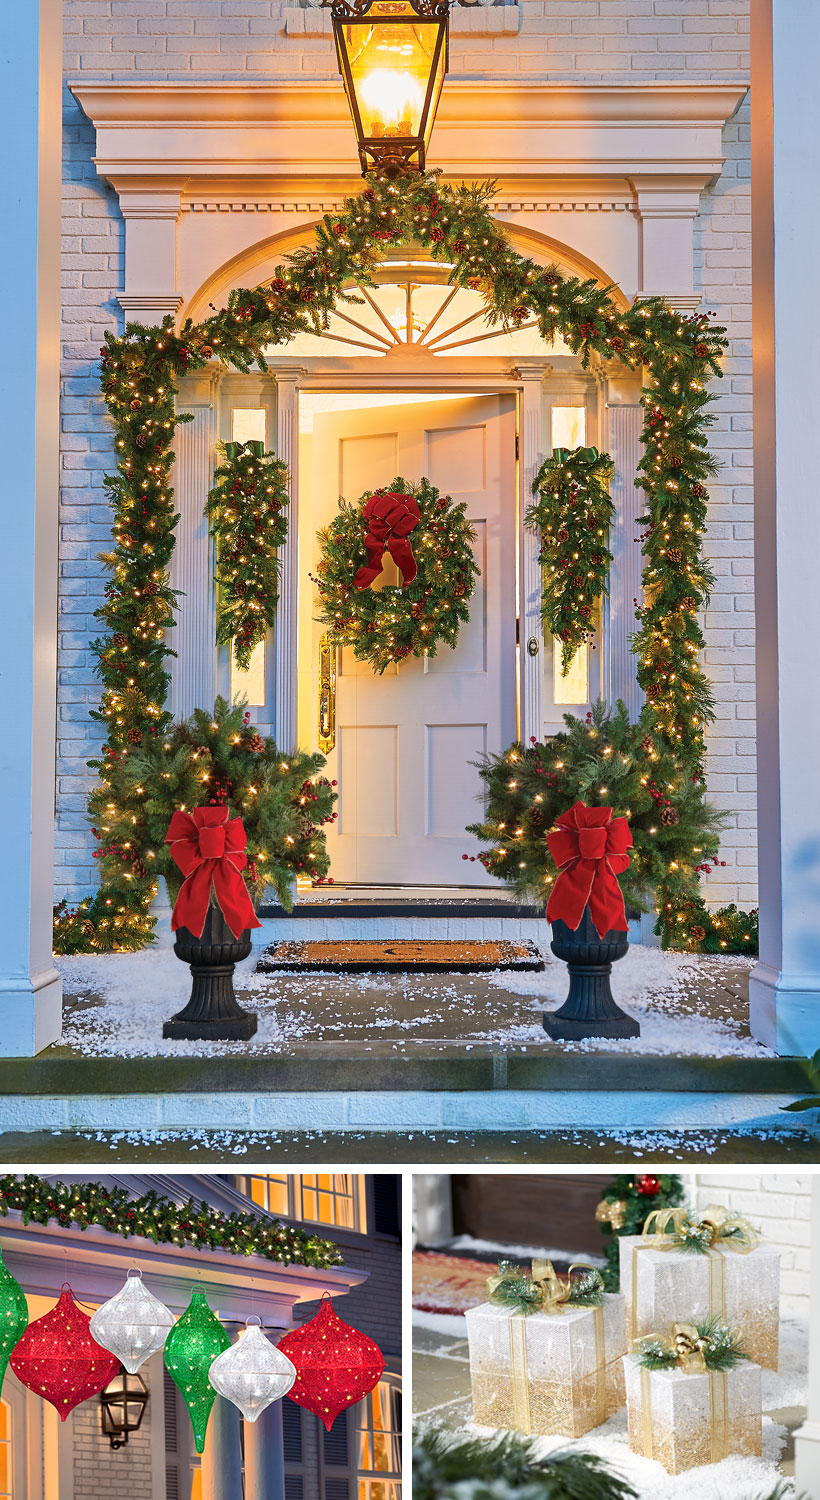 Dress Your Home to Impress with These Outside Christmas Decorations-Entryway